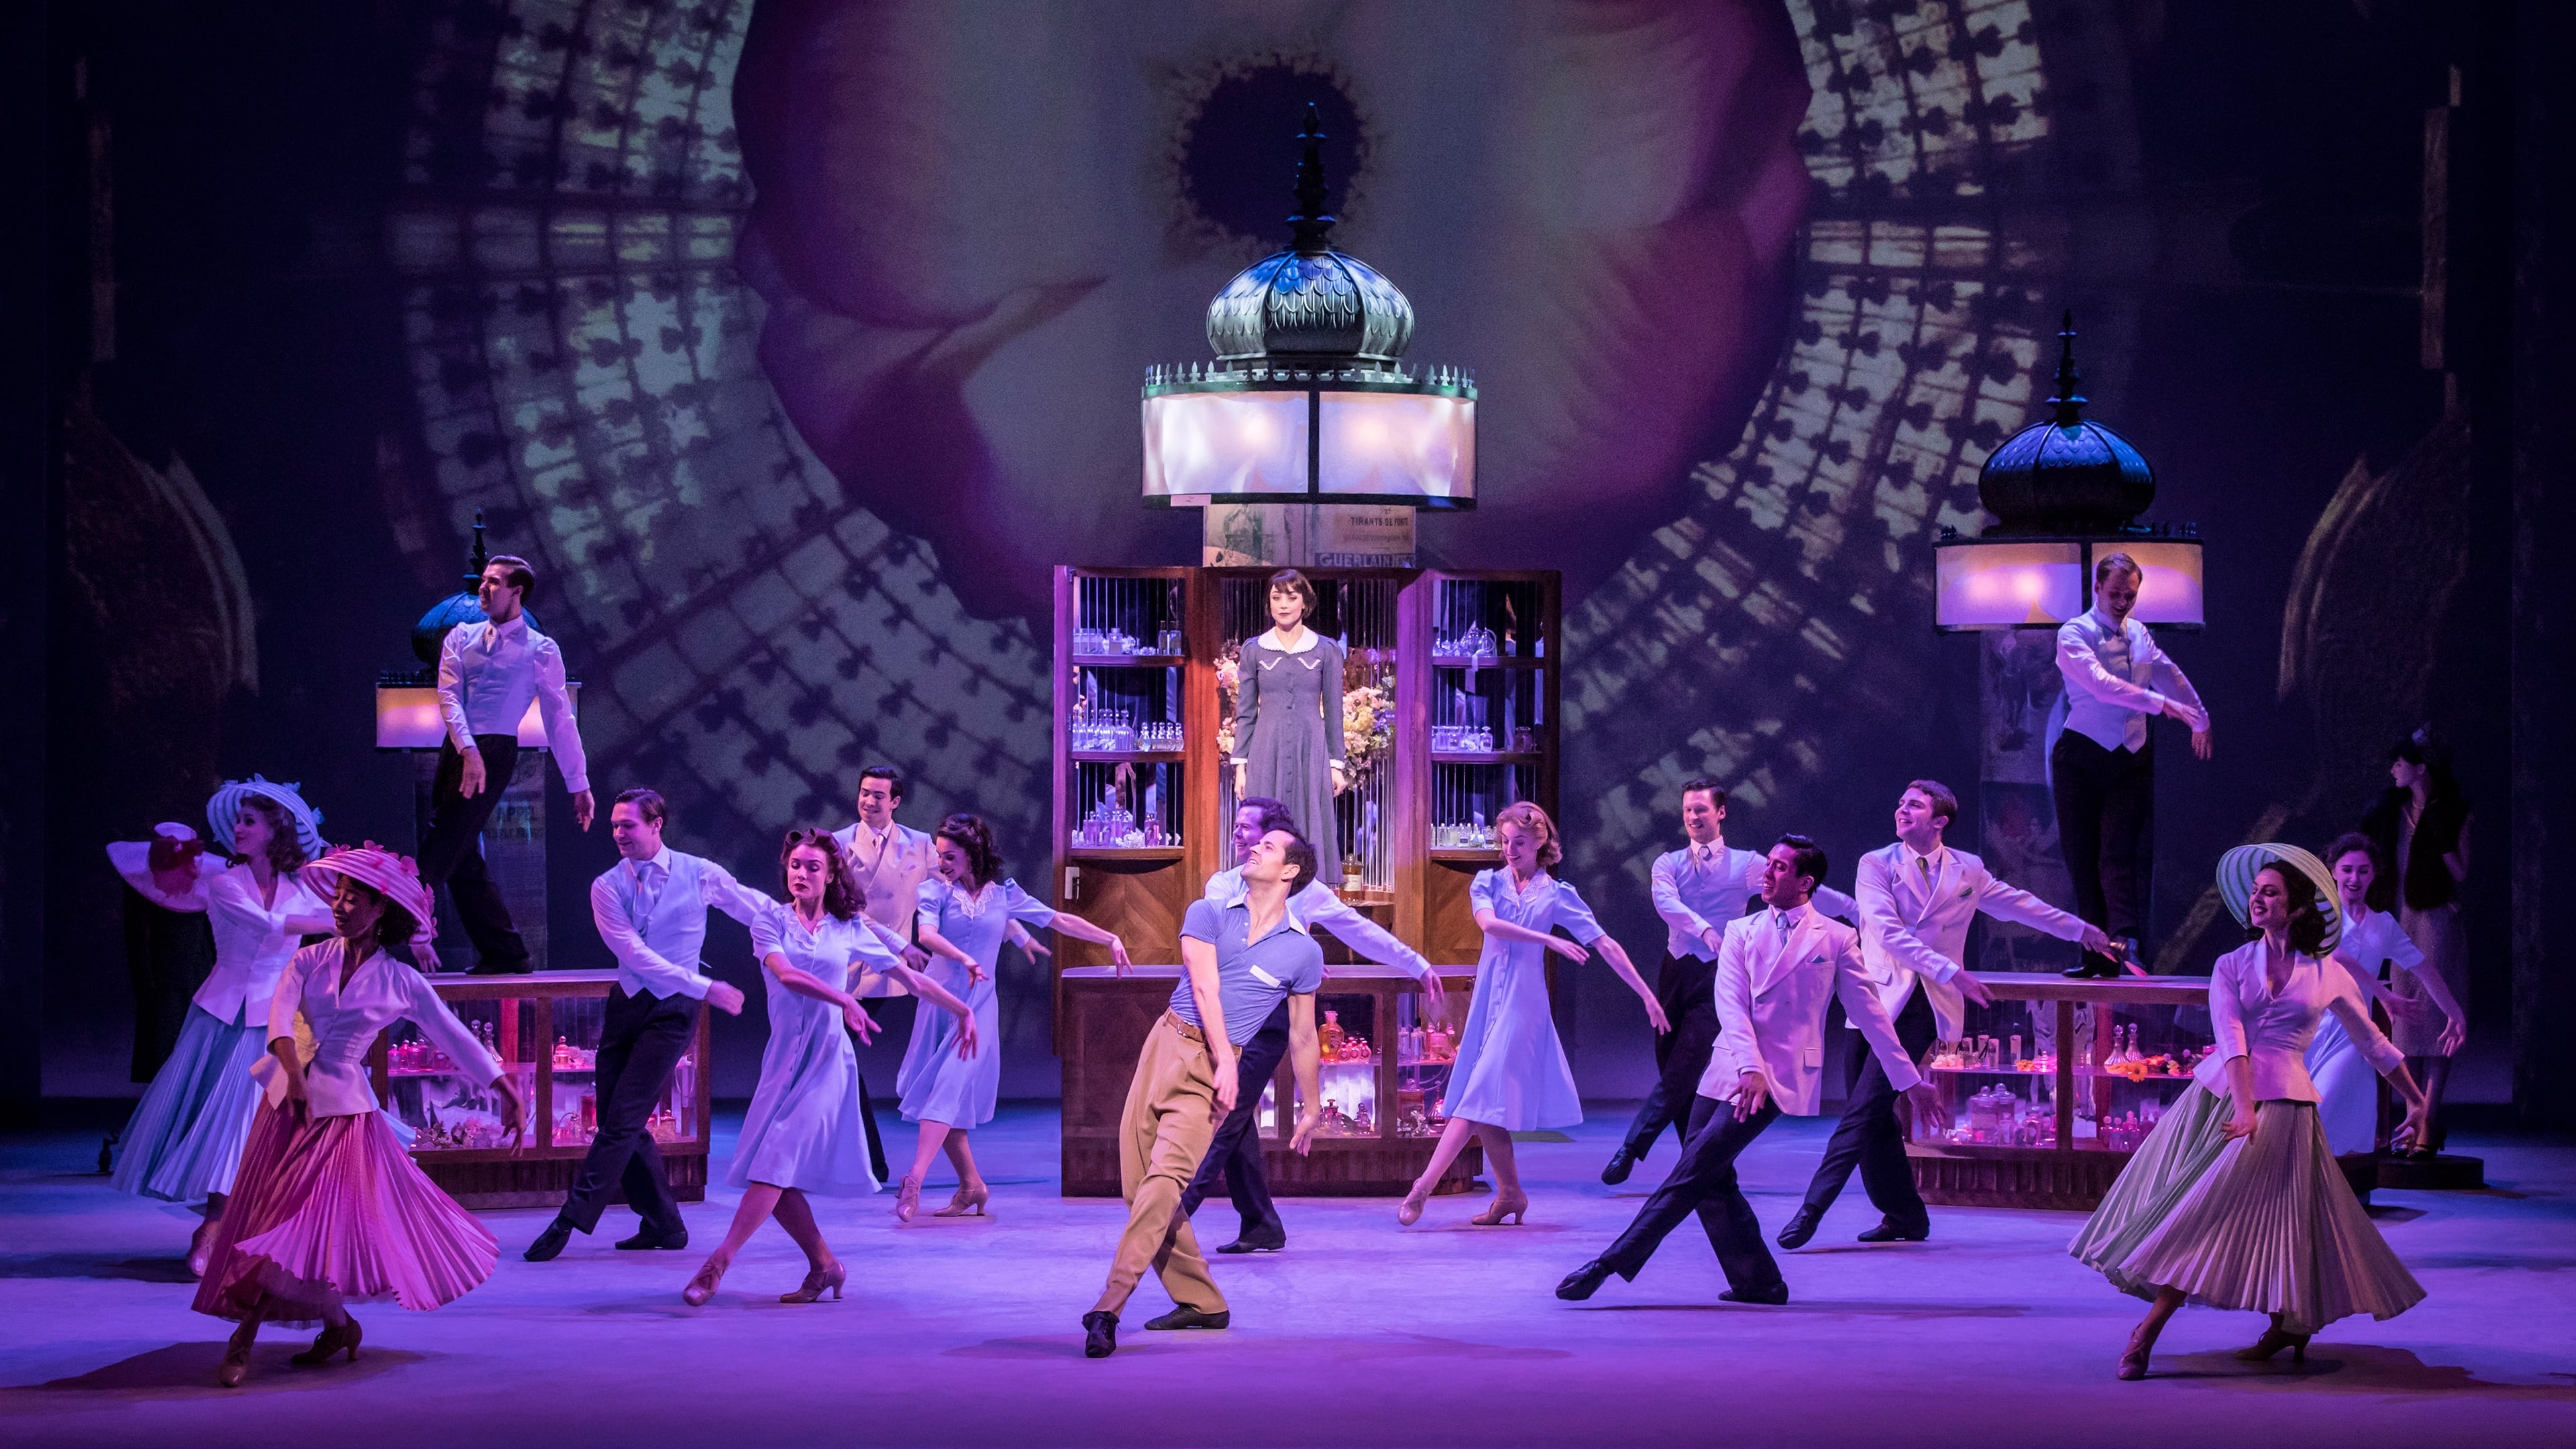 Musical: An American in Paris, Opened at the Theatre du Chatelet in Paris in December 2014. 3840x2160 4K Wallpaper.